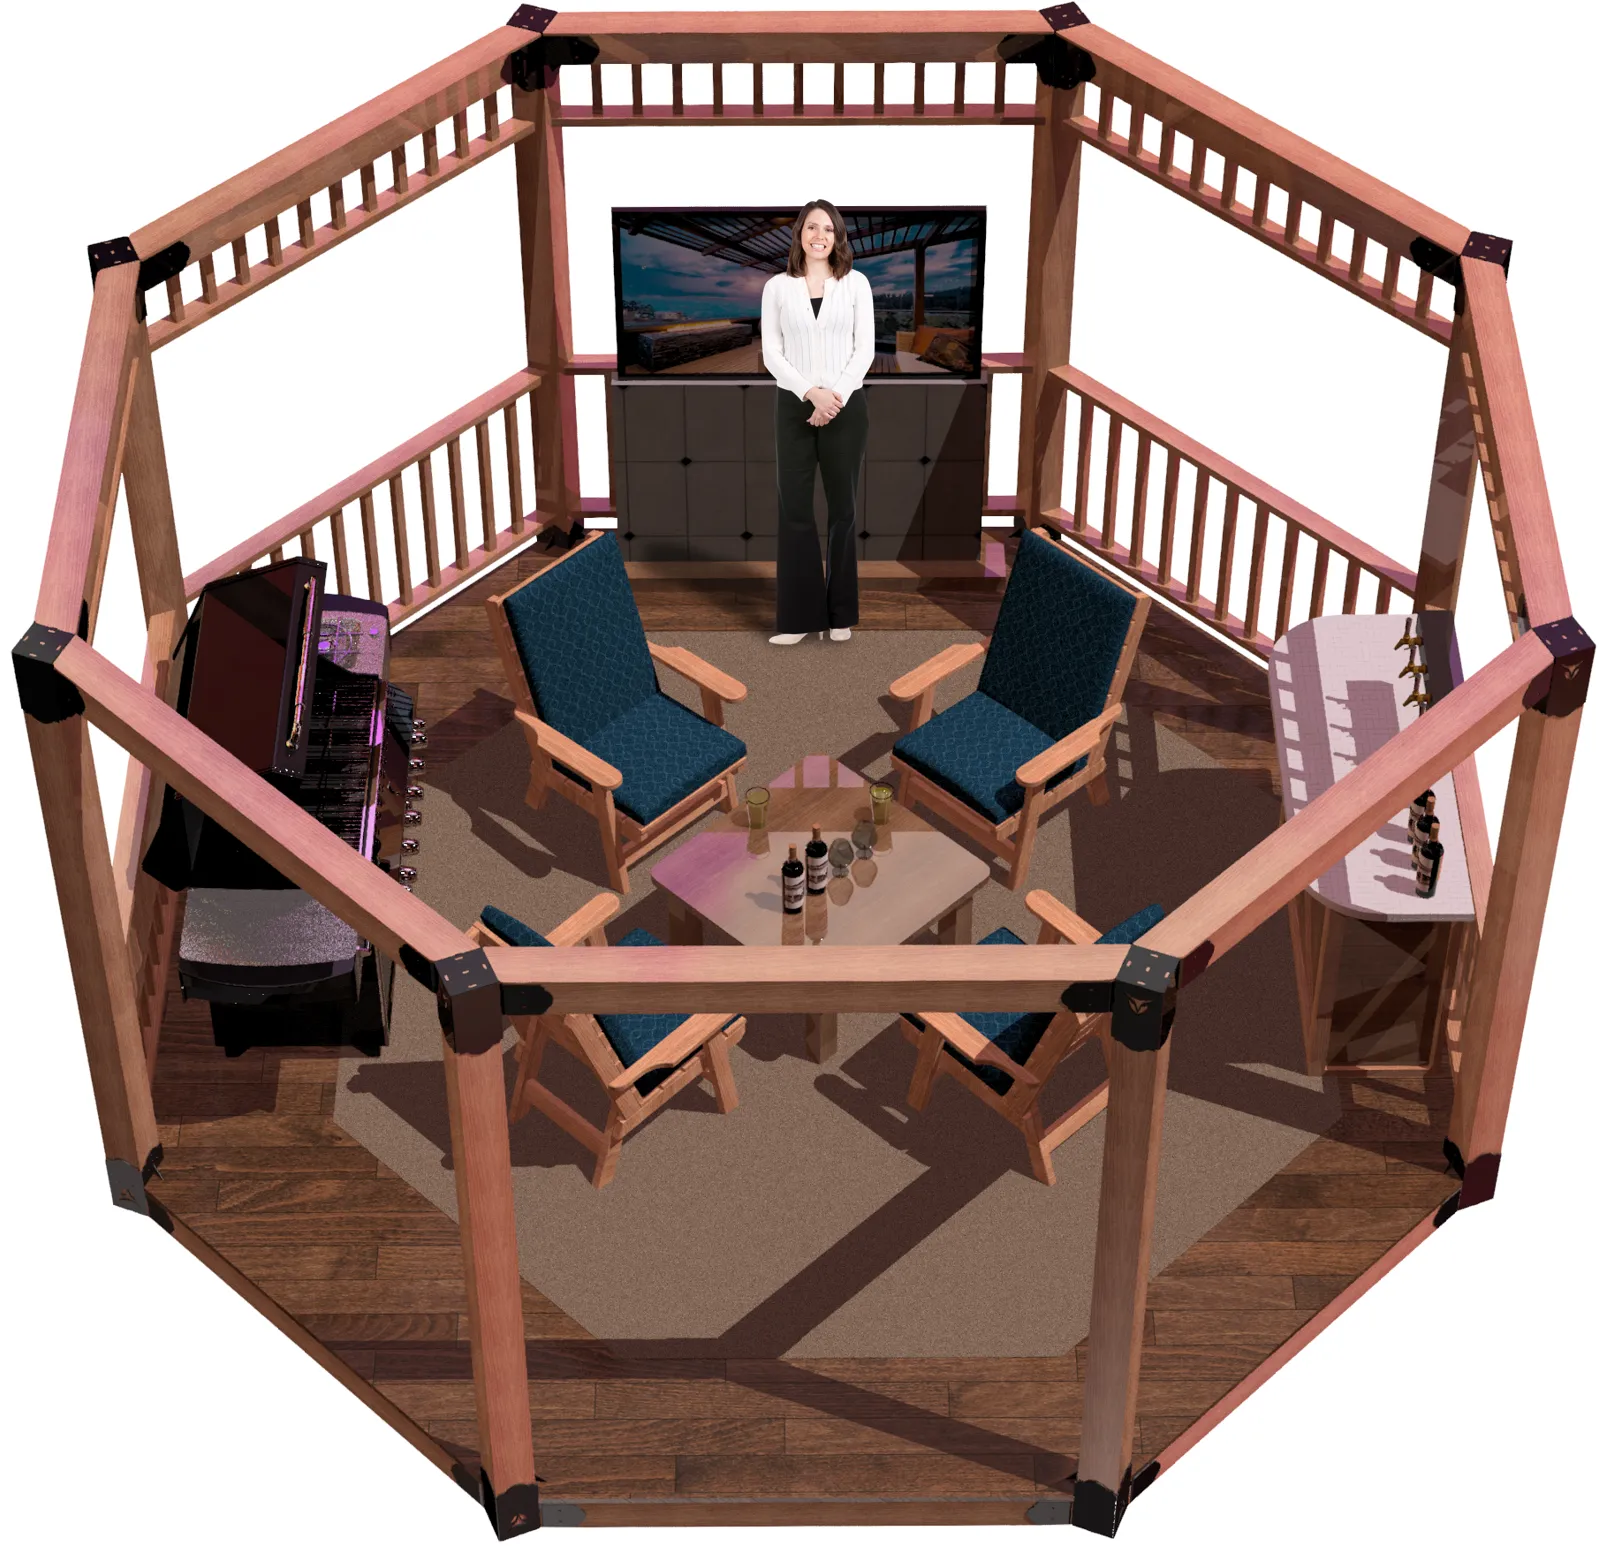 view of a DIY 6X6 floating deck, open top octagon pergola. A bar with beer taps & wine bottles, barbecuer, LED TV, and casual furniture inside and a girl standing and smiling inside it.